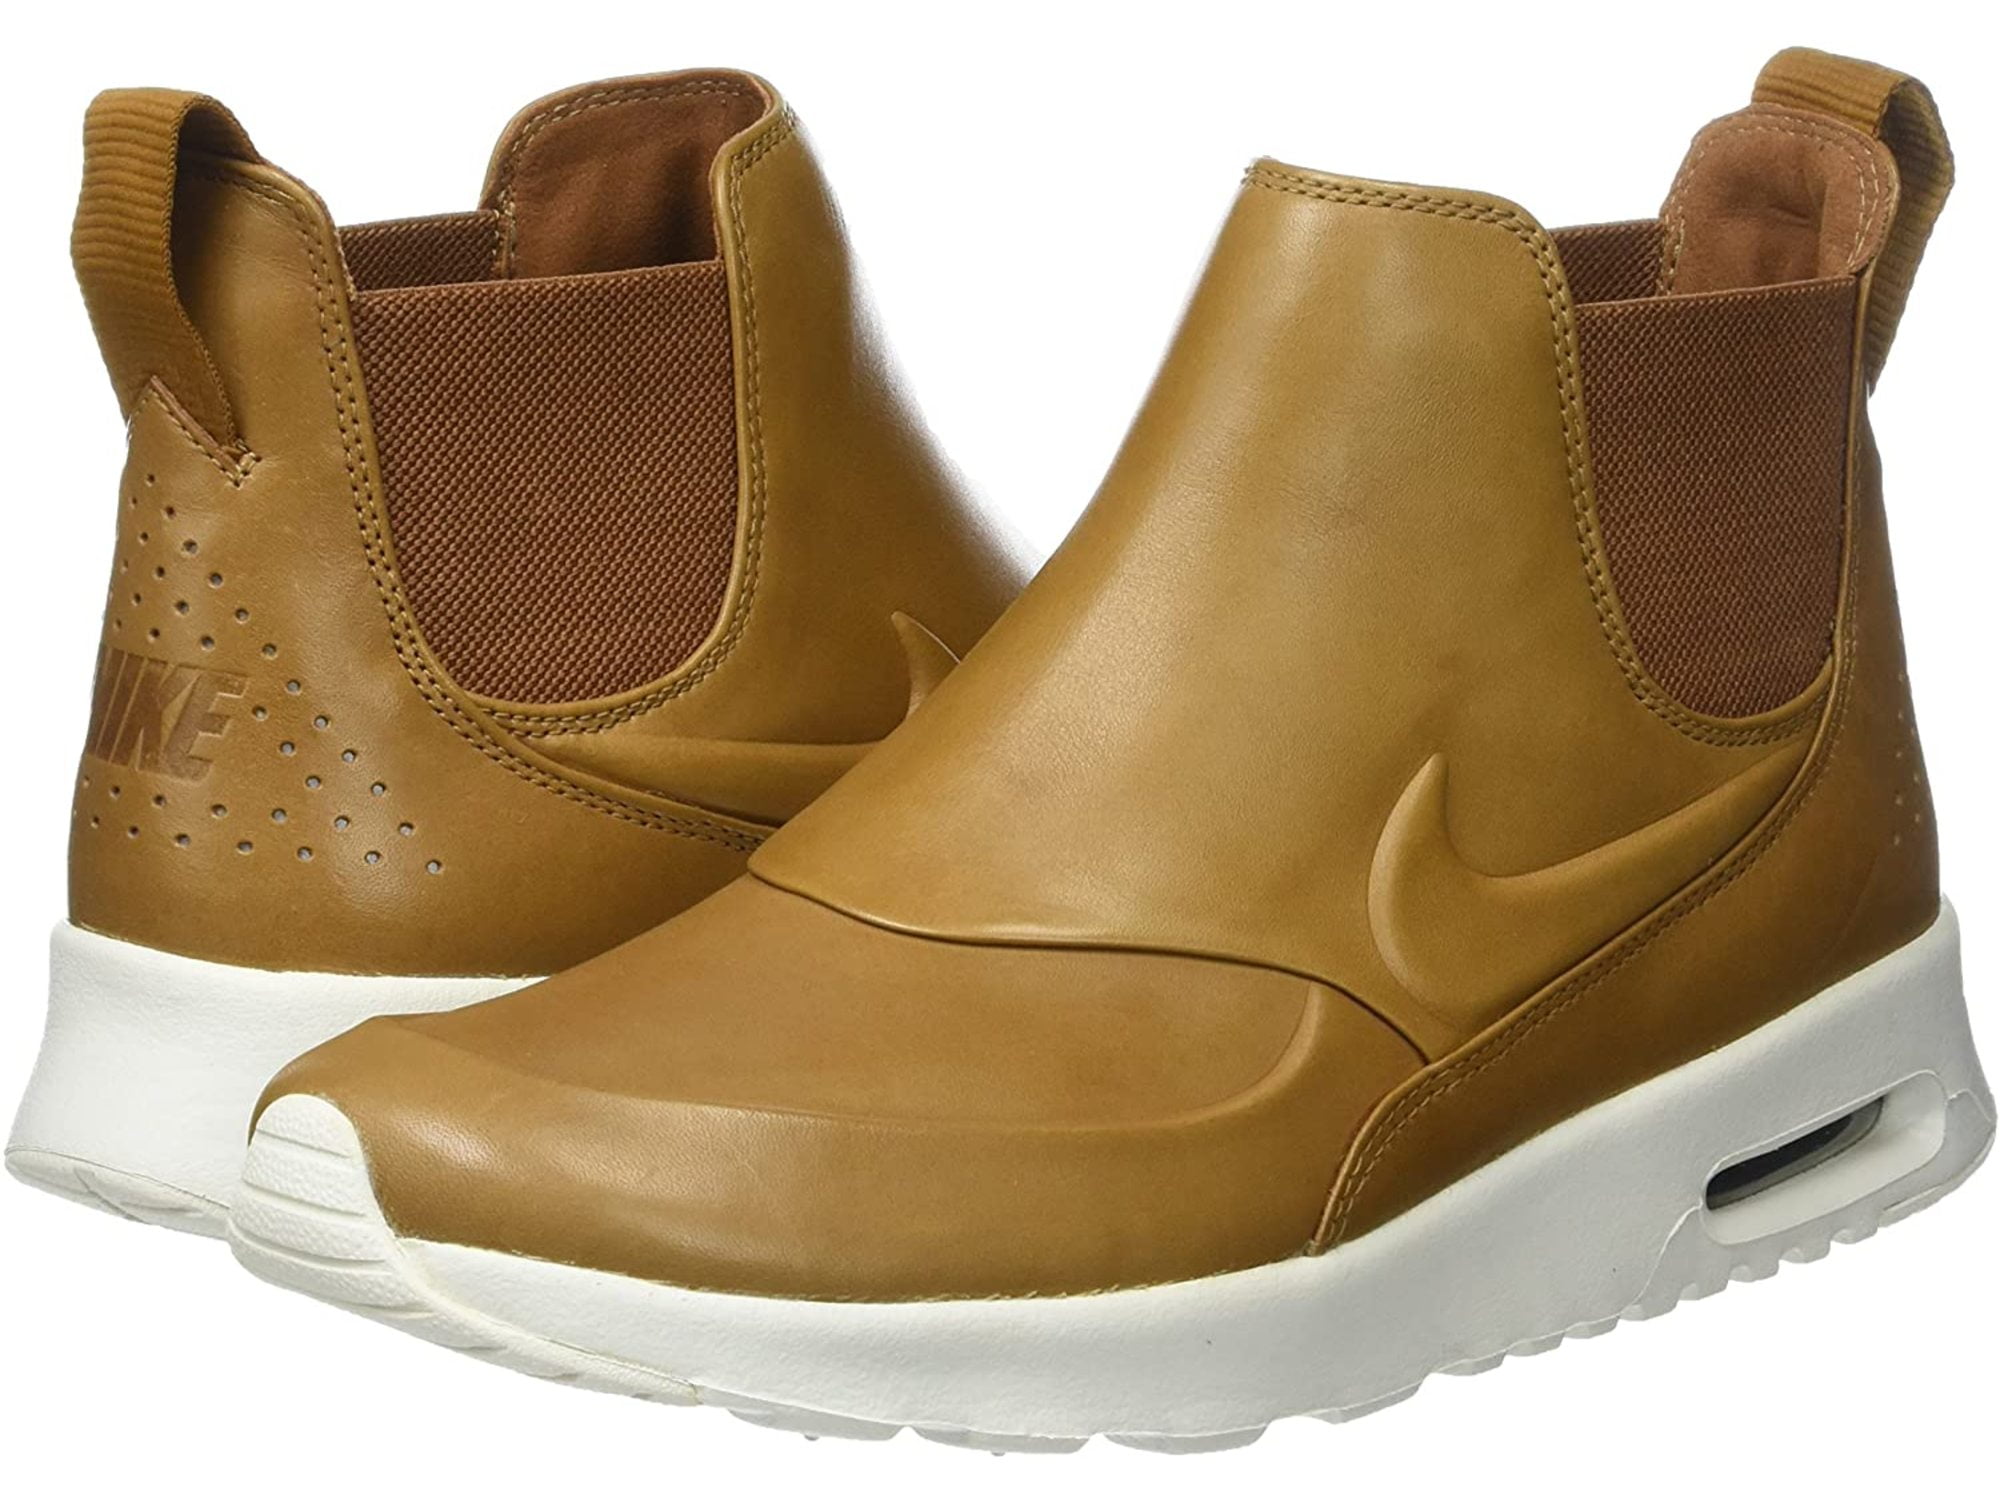 emotional Experienced person pamper Nike Womens Air Max Thea Mid Leather Hight Top Pull On Running Sneaker -  Walmart.com